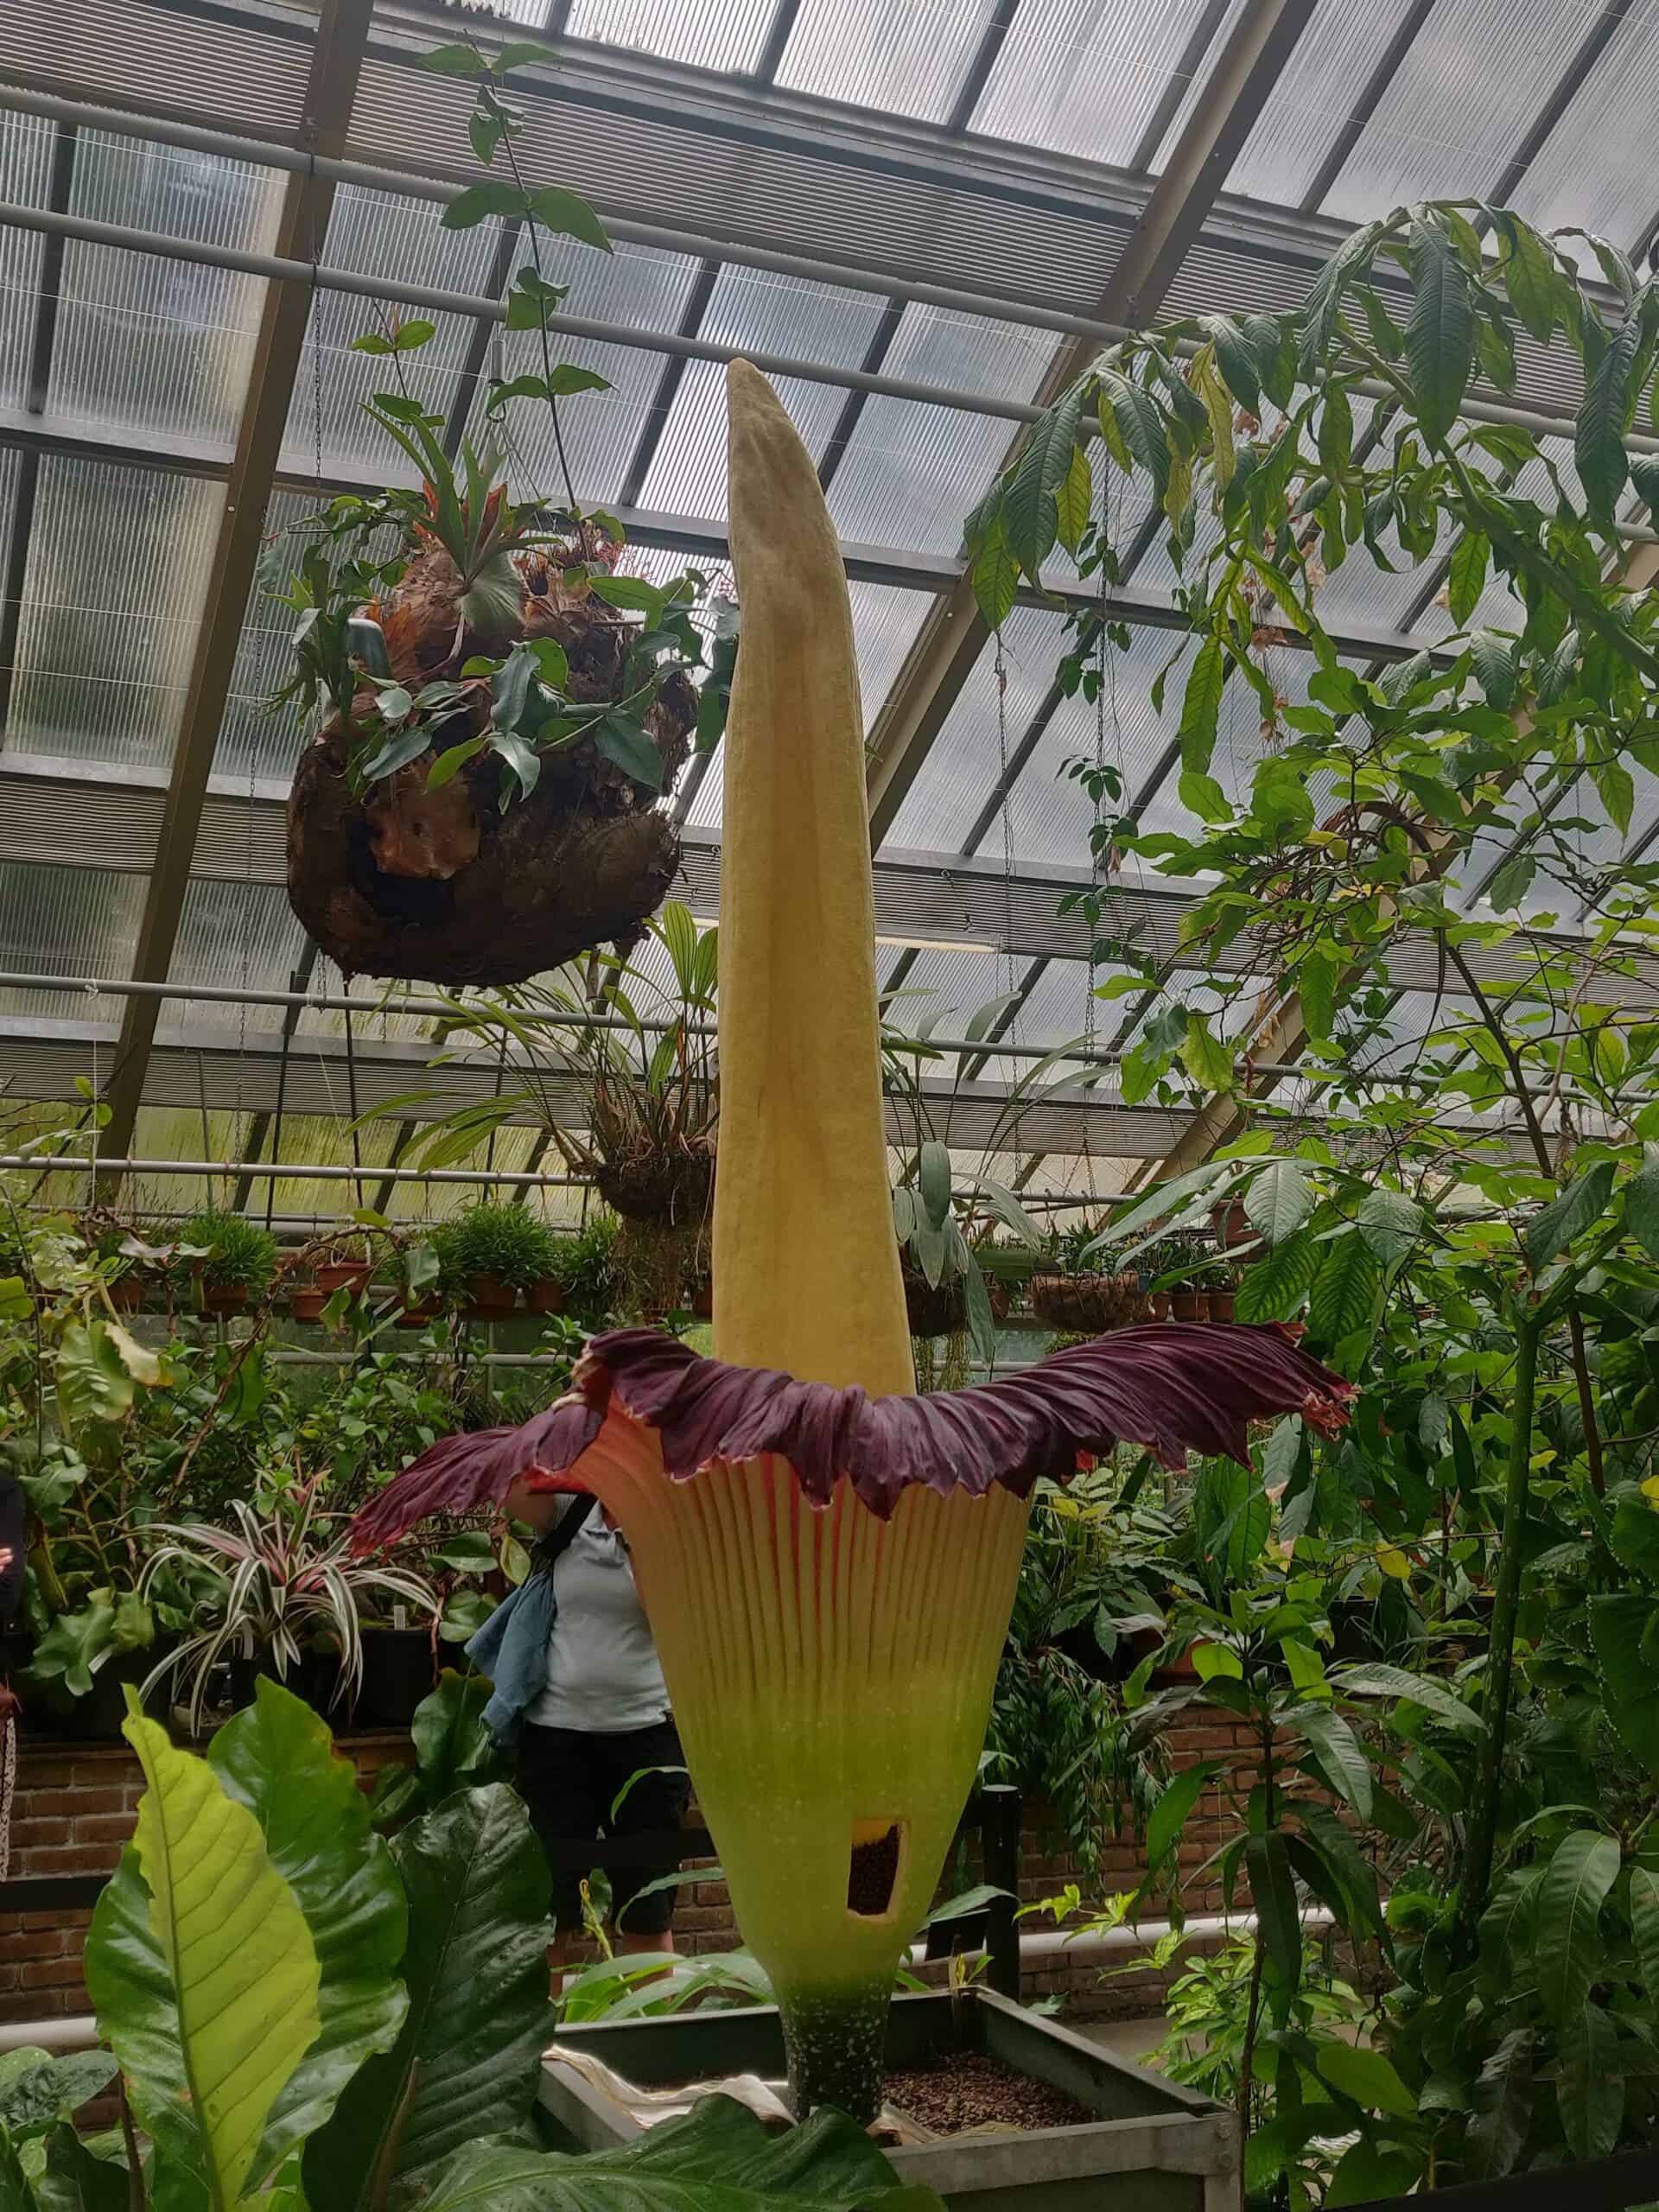 Titan penis flower blooms in one of many oldest botanical gardens on the planet